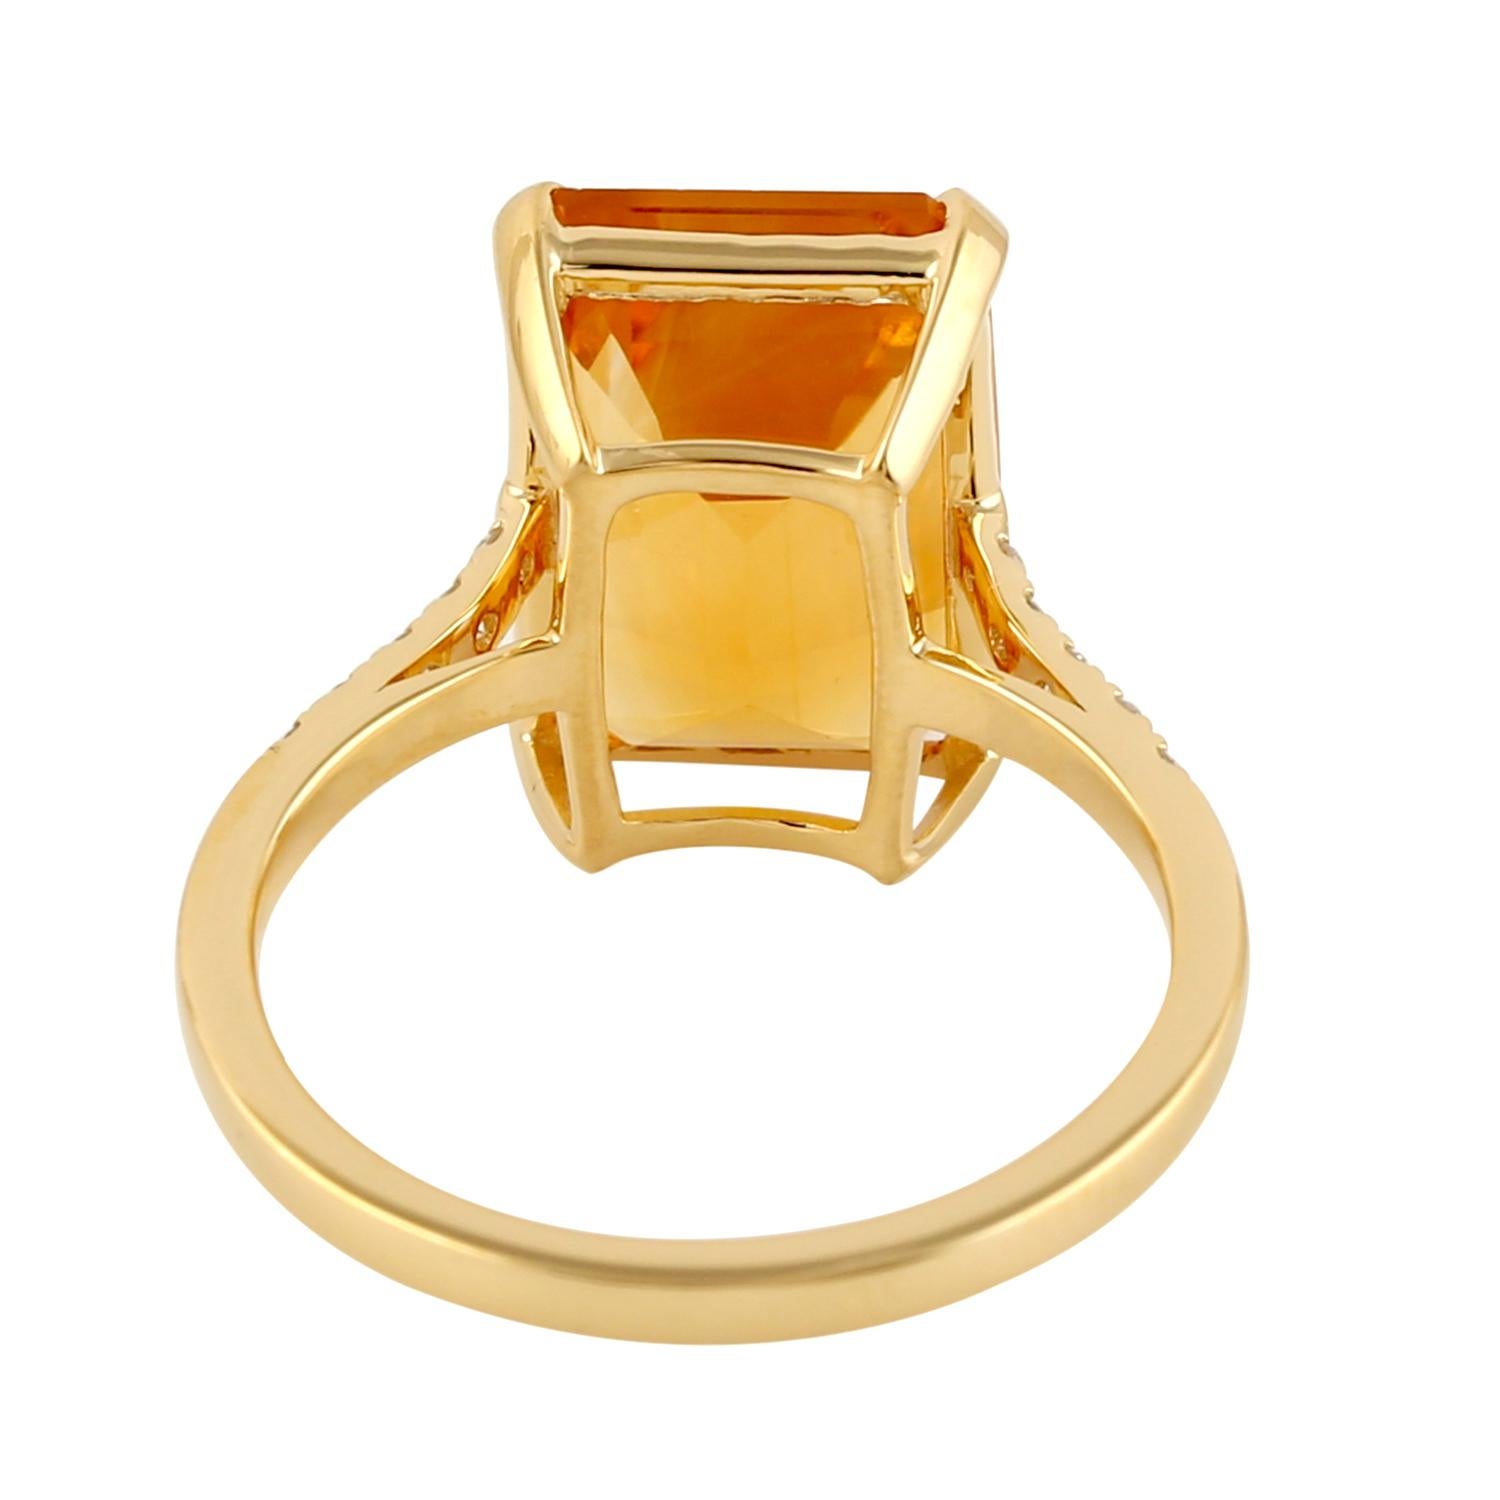 Art Deco Emerald Cut Citrine Cocktail Ring with Pave Diamond in 18k Yellow Gold For Sale